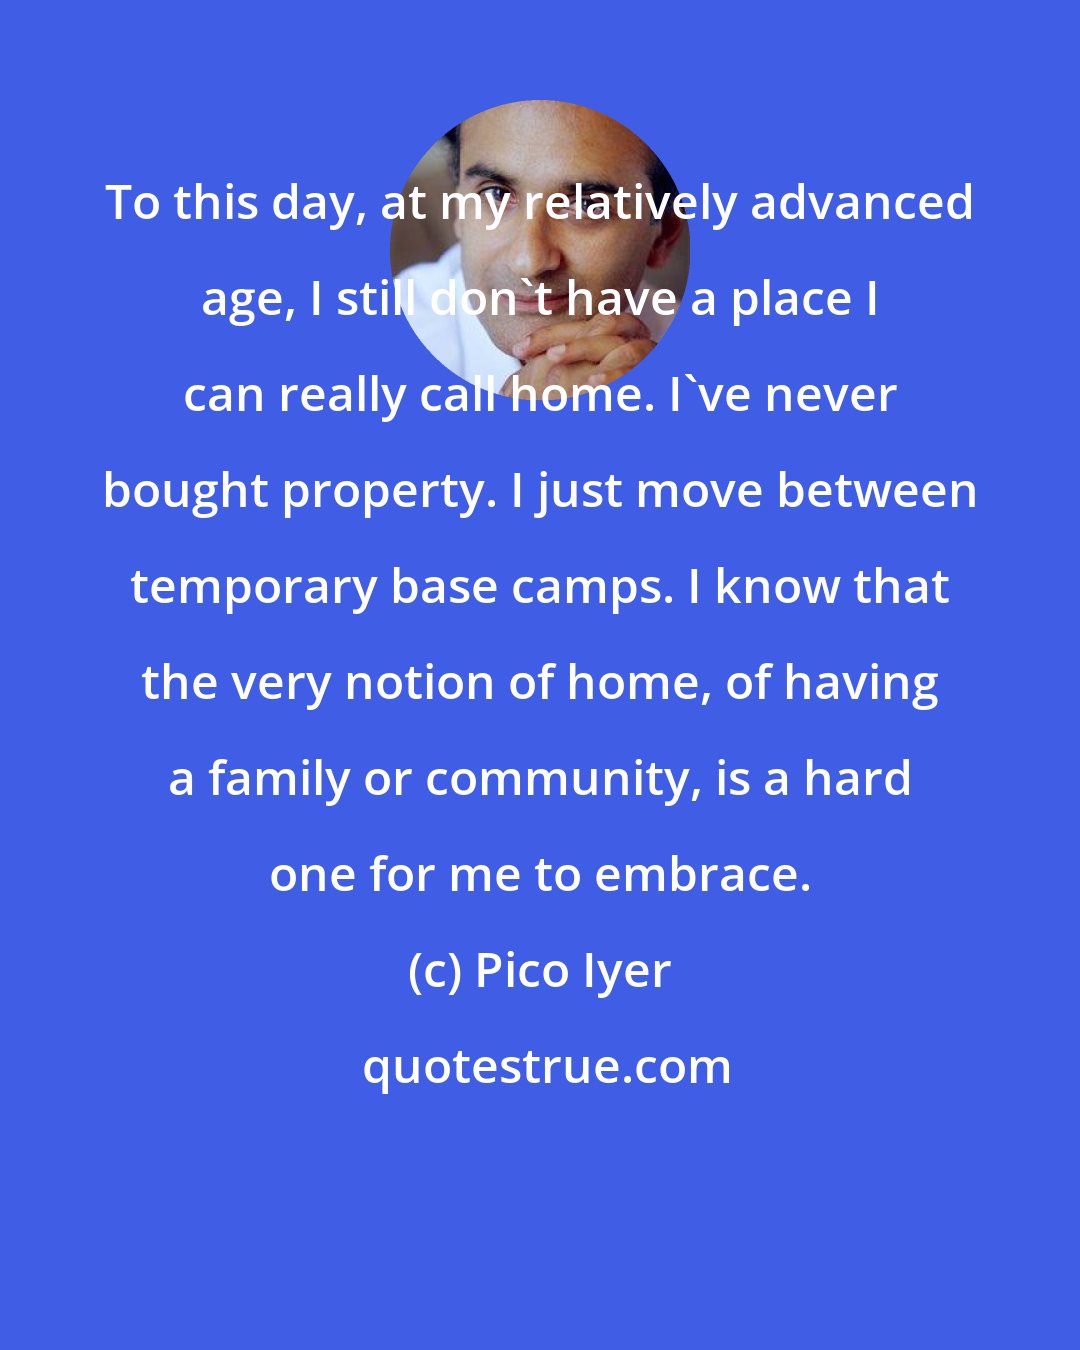 Pico Iyer: To this day, at my relatively advanced age, I still don't have a place I can really call home. I've never bought property. I just move between temporary base camps. I know that the very notion of home, of having a family or community, is a hard one for me to embrace.